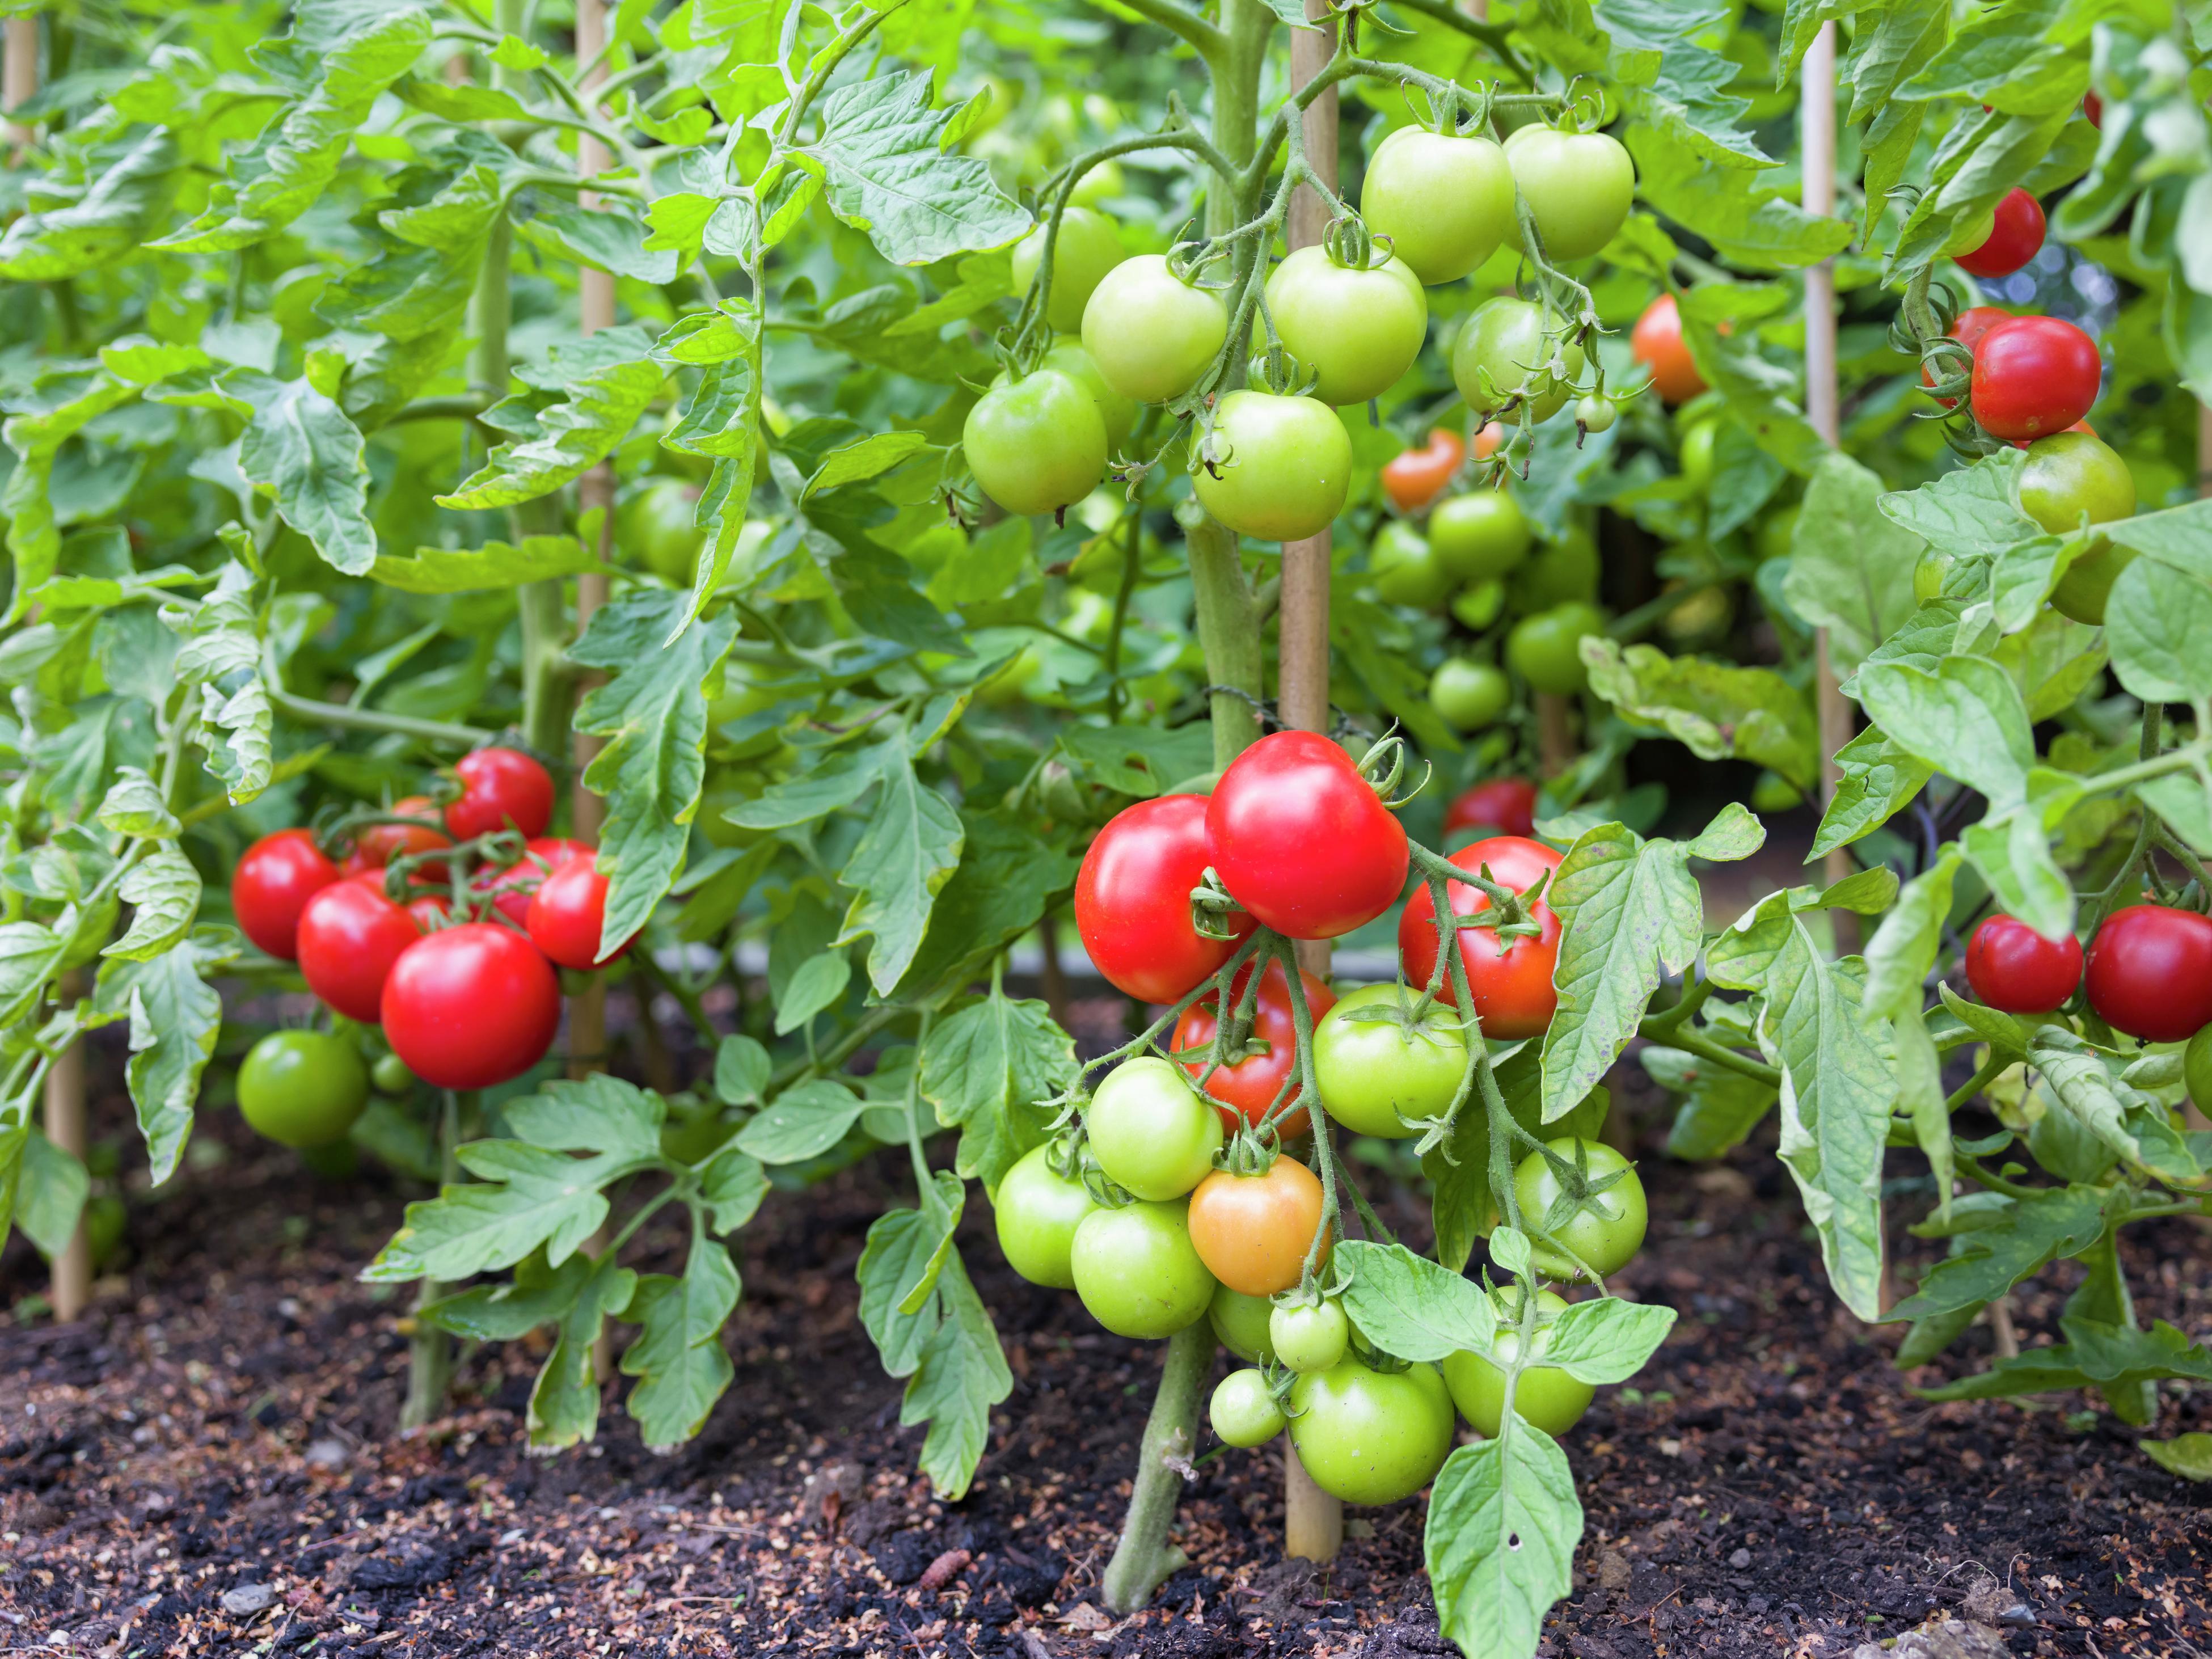 How To Jump Start Tomato Plants - 3 Tips To Get Plants Growing!